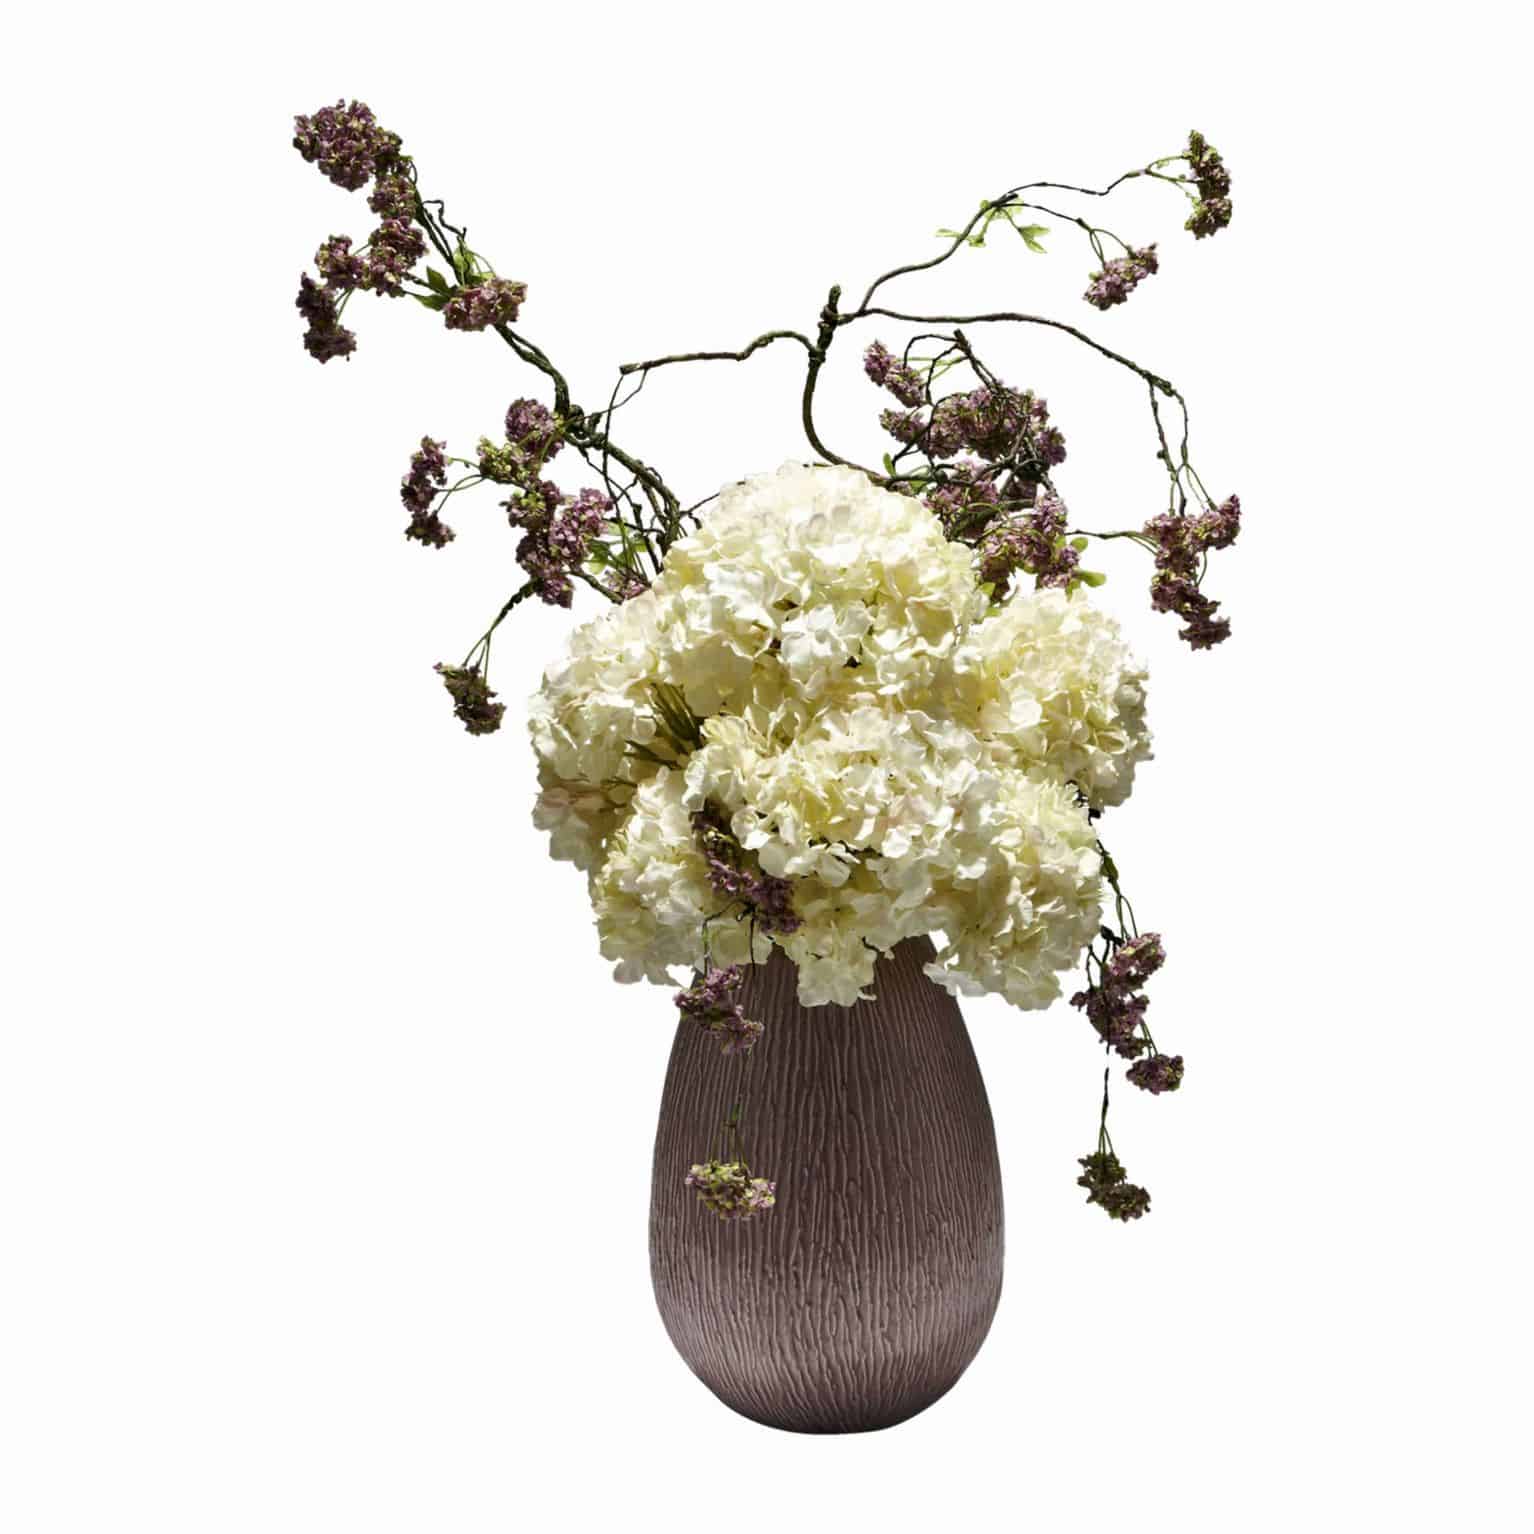 Shop for our premium quality cream silk hydrangea flowers arranged in a dome broken up with artificial purple snowball garland in a deep pink ceramic pot.